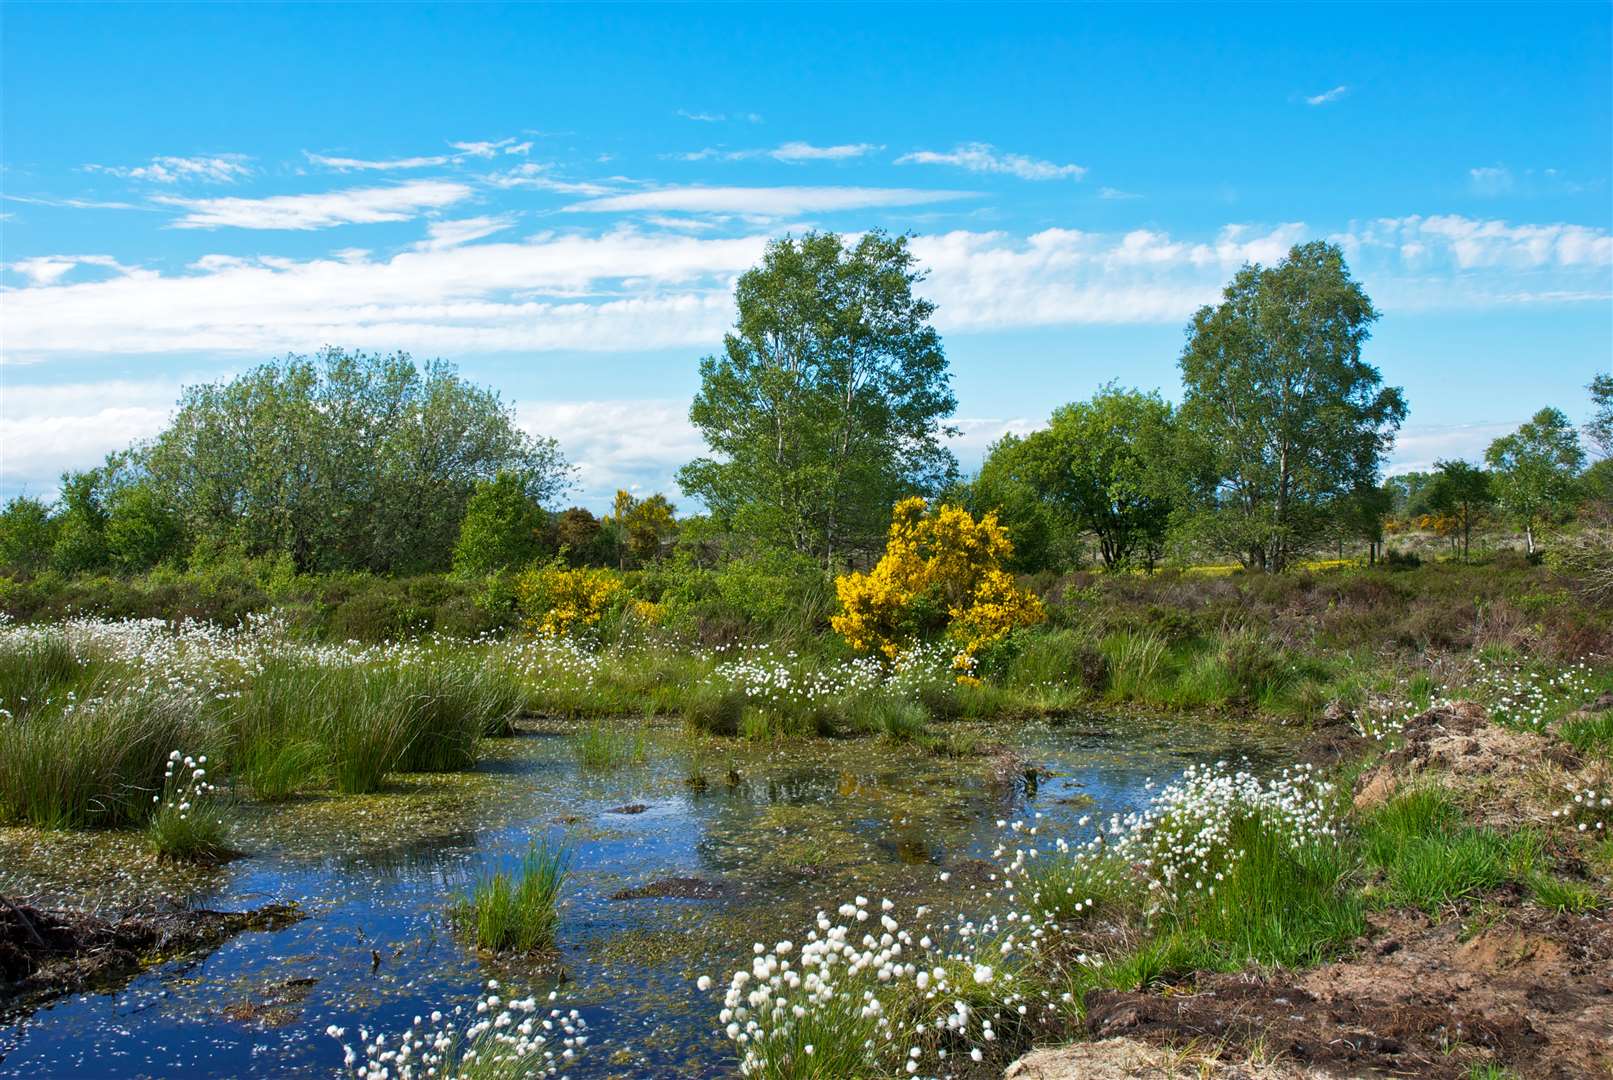 Drumburgh Moss reserve is open but Cumbria Wildlife Trust has closed car parks on its nature reserves due to coronavirus restrictions (John Morrison)